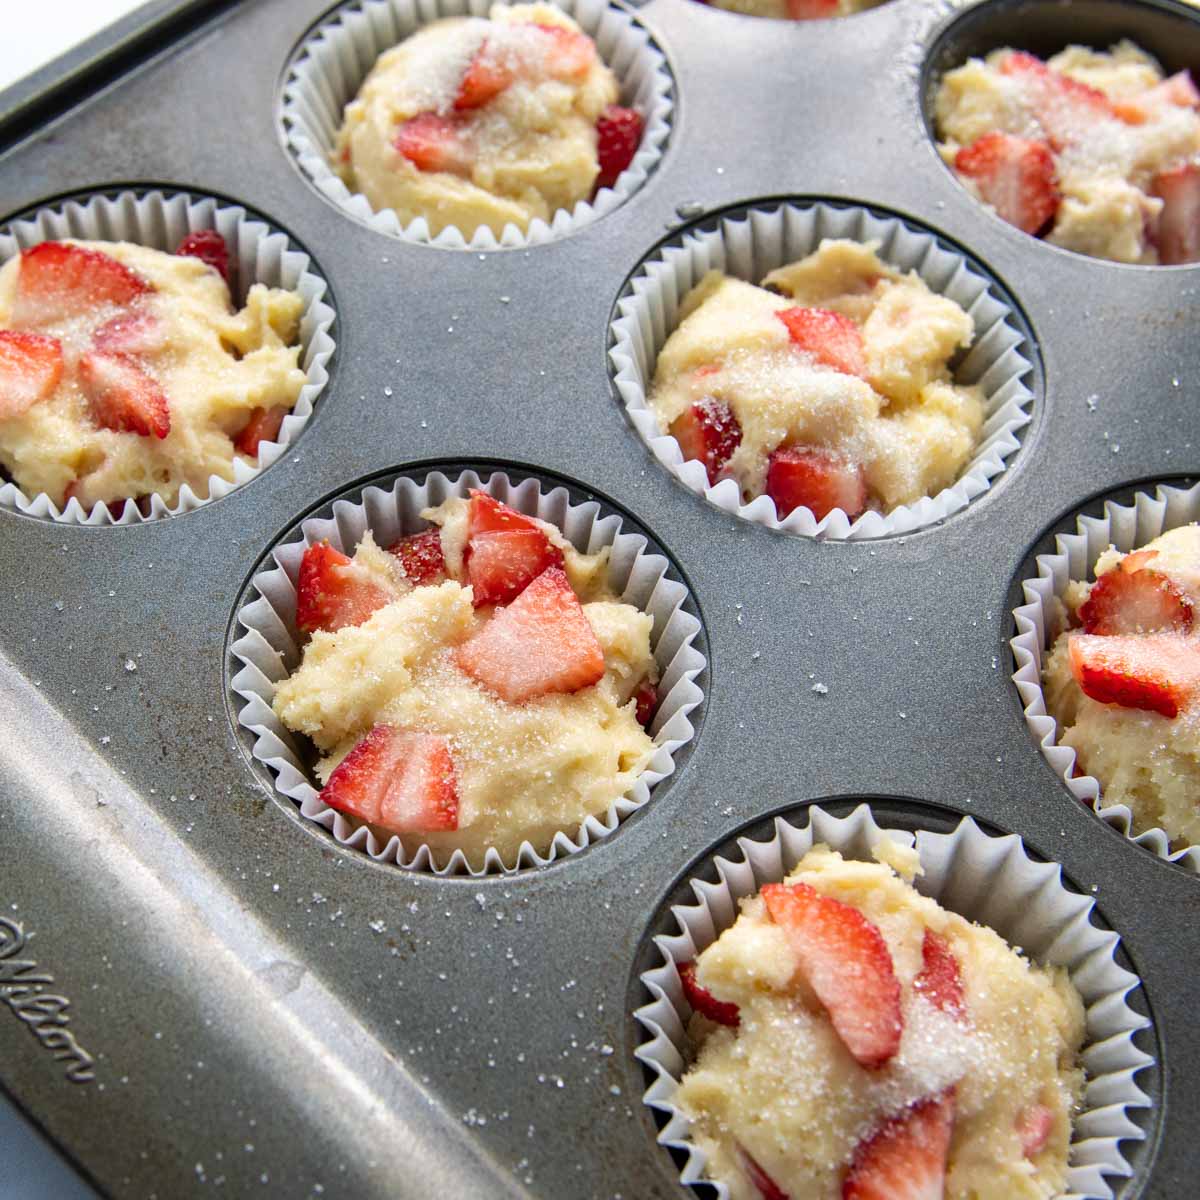 unbaked muffins in a muffin pan with sugar sprinkled on the tops.